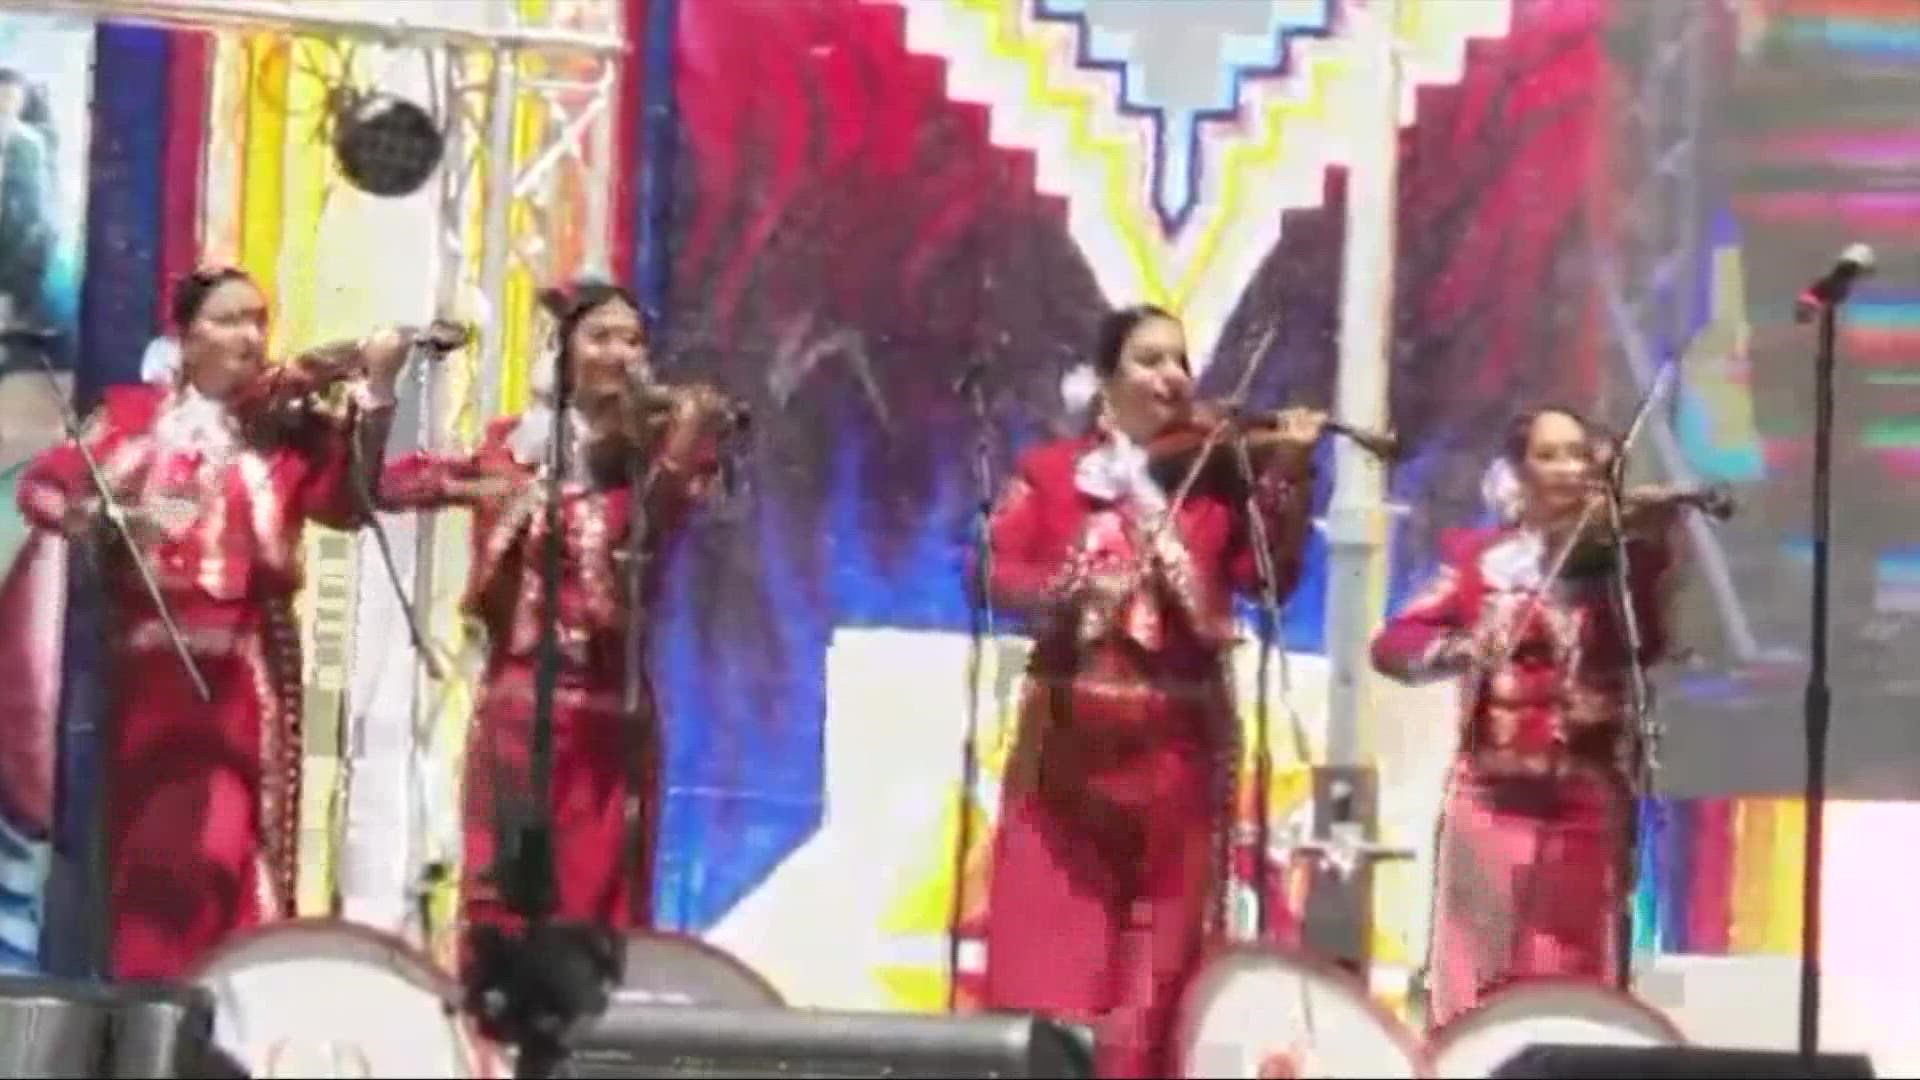 The Grammy nominated recording artist  Dinorah Klingler and her all-female group Mariachi Bonitas will perform on Sunday.